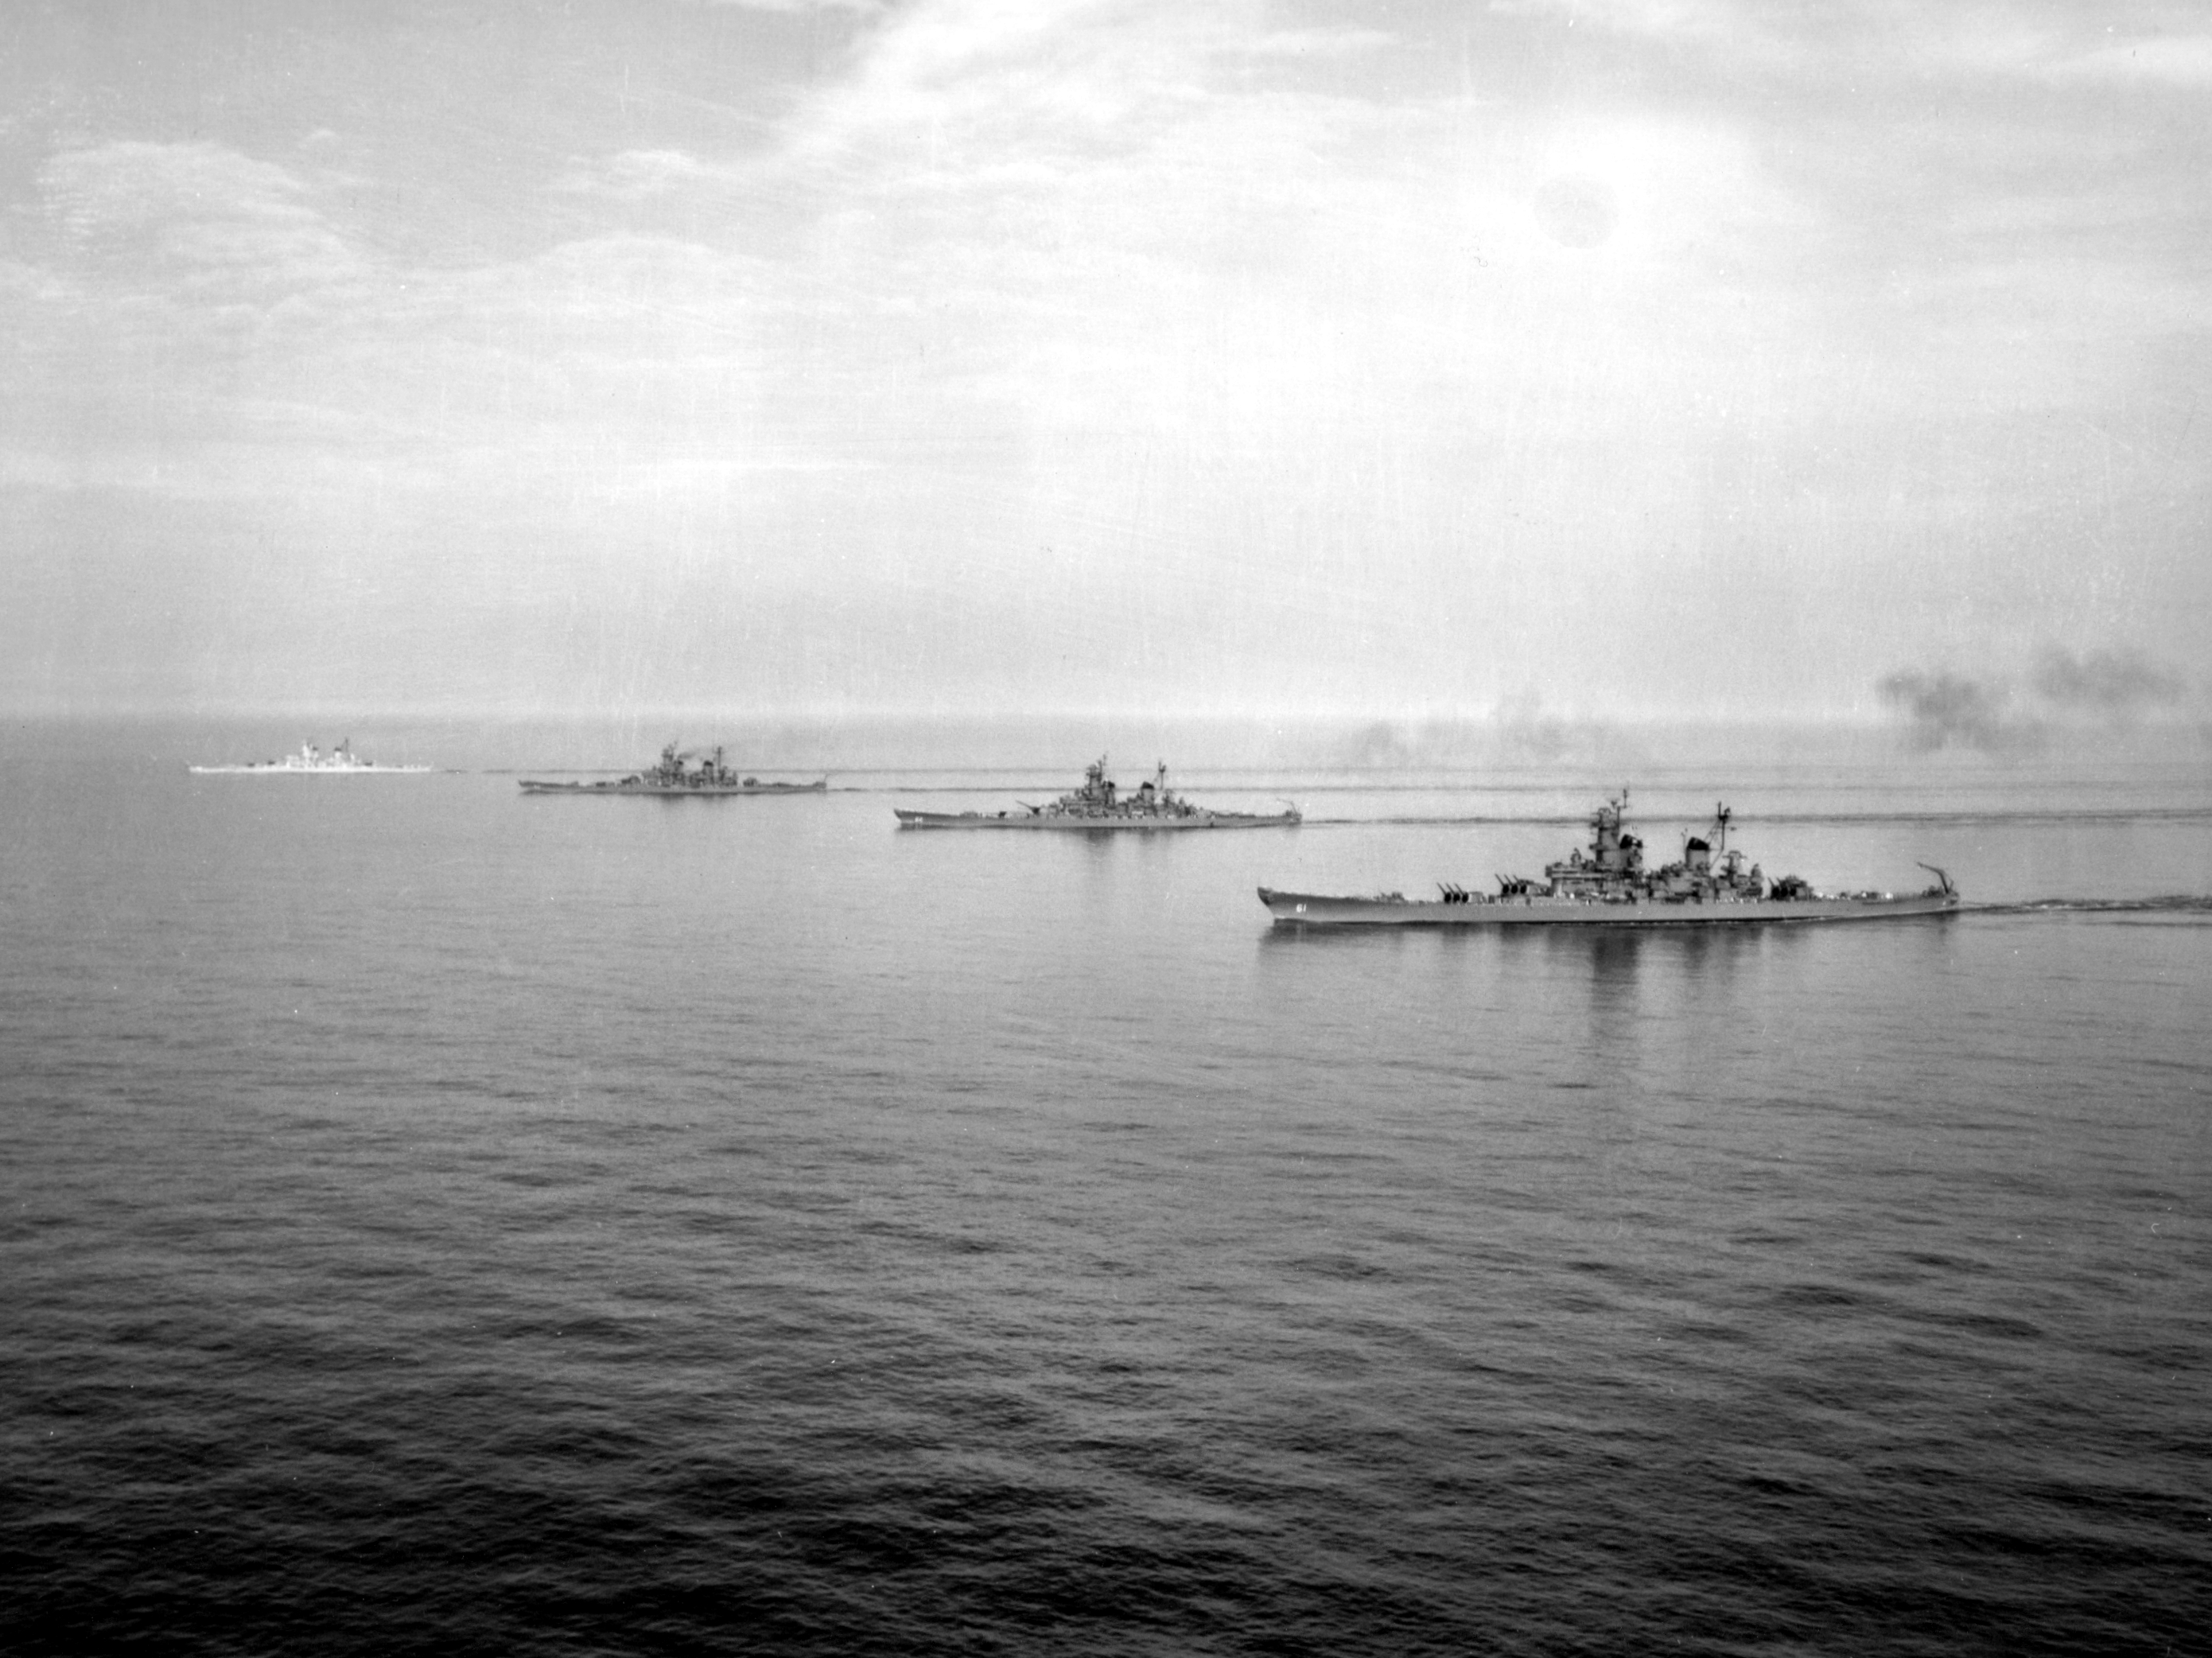 USS Iowa (foreground), USS Wisconsin, USS Missouri, and USS New Jersey (background) off the Virginia Capes, Virginia, United States, 7 Jun 1954